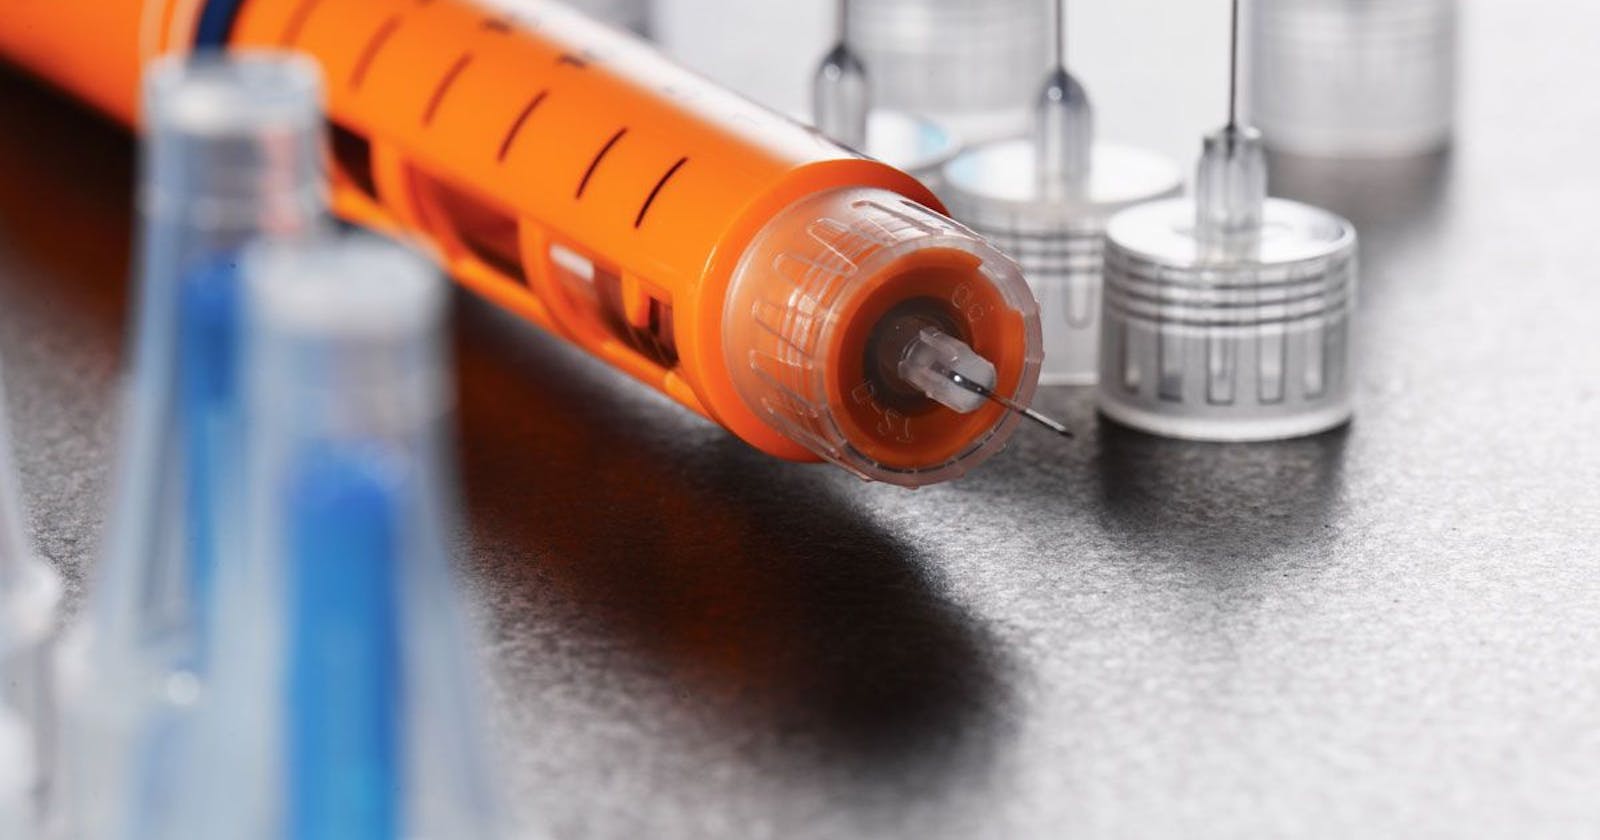 Drug Device Combination Products Market Analysis, Size, Share, Growth and Forecast 2027